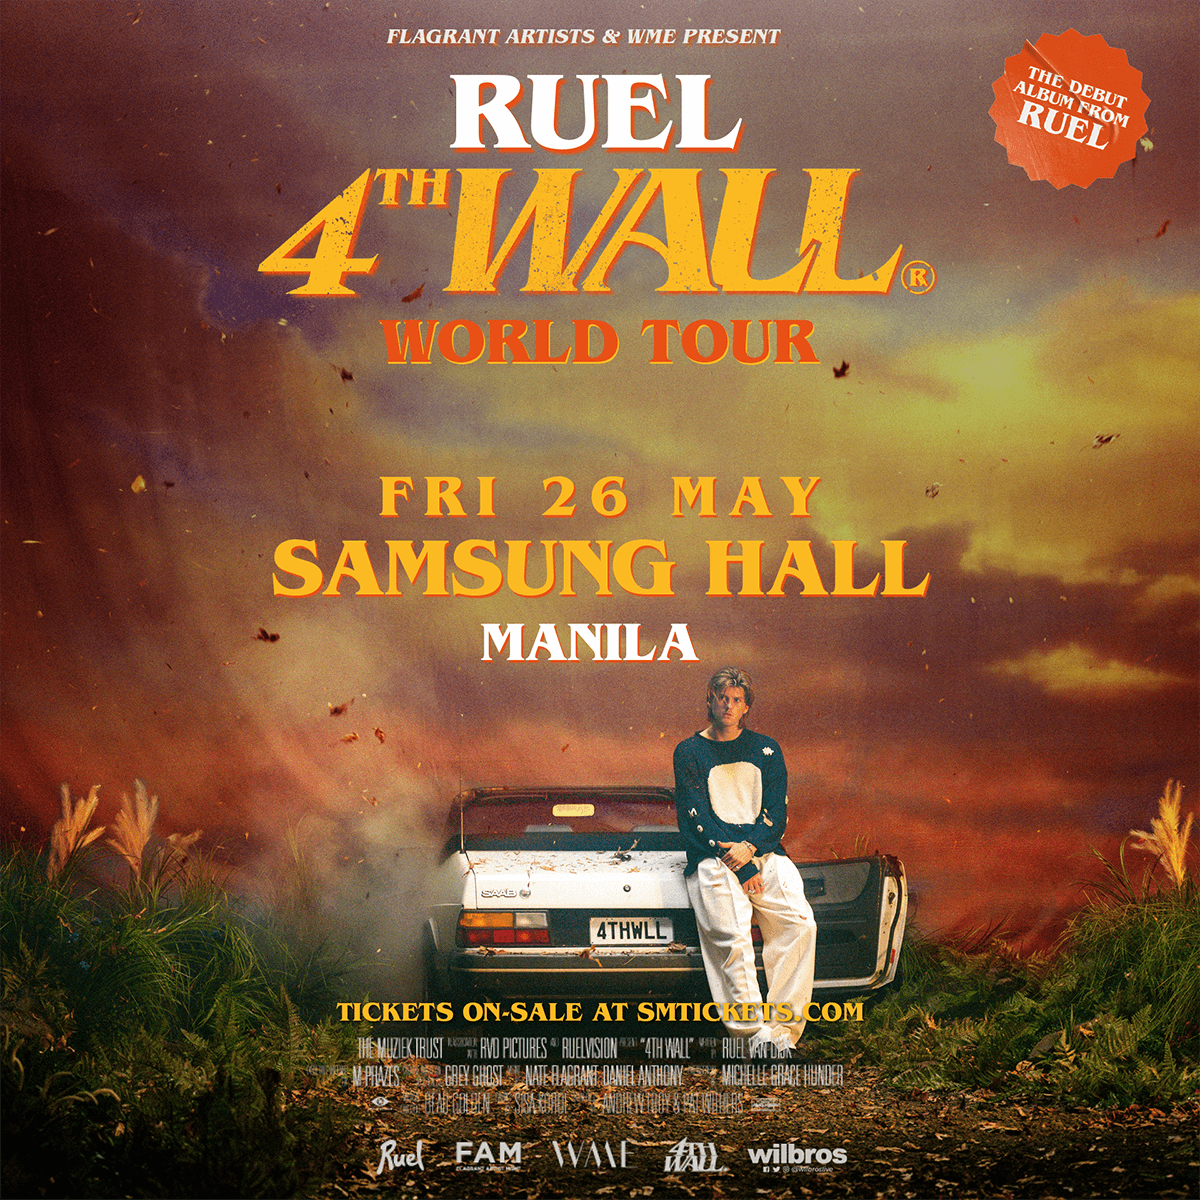 ruel-coming-vack-to-manila-for-4th-wall-world-tour